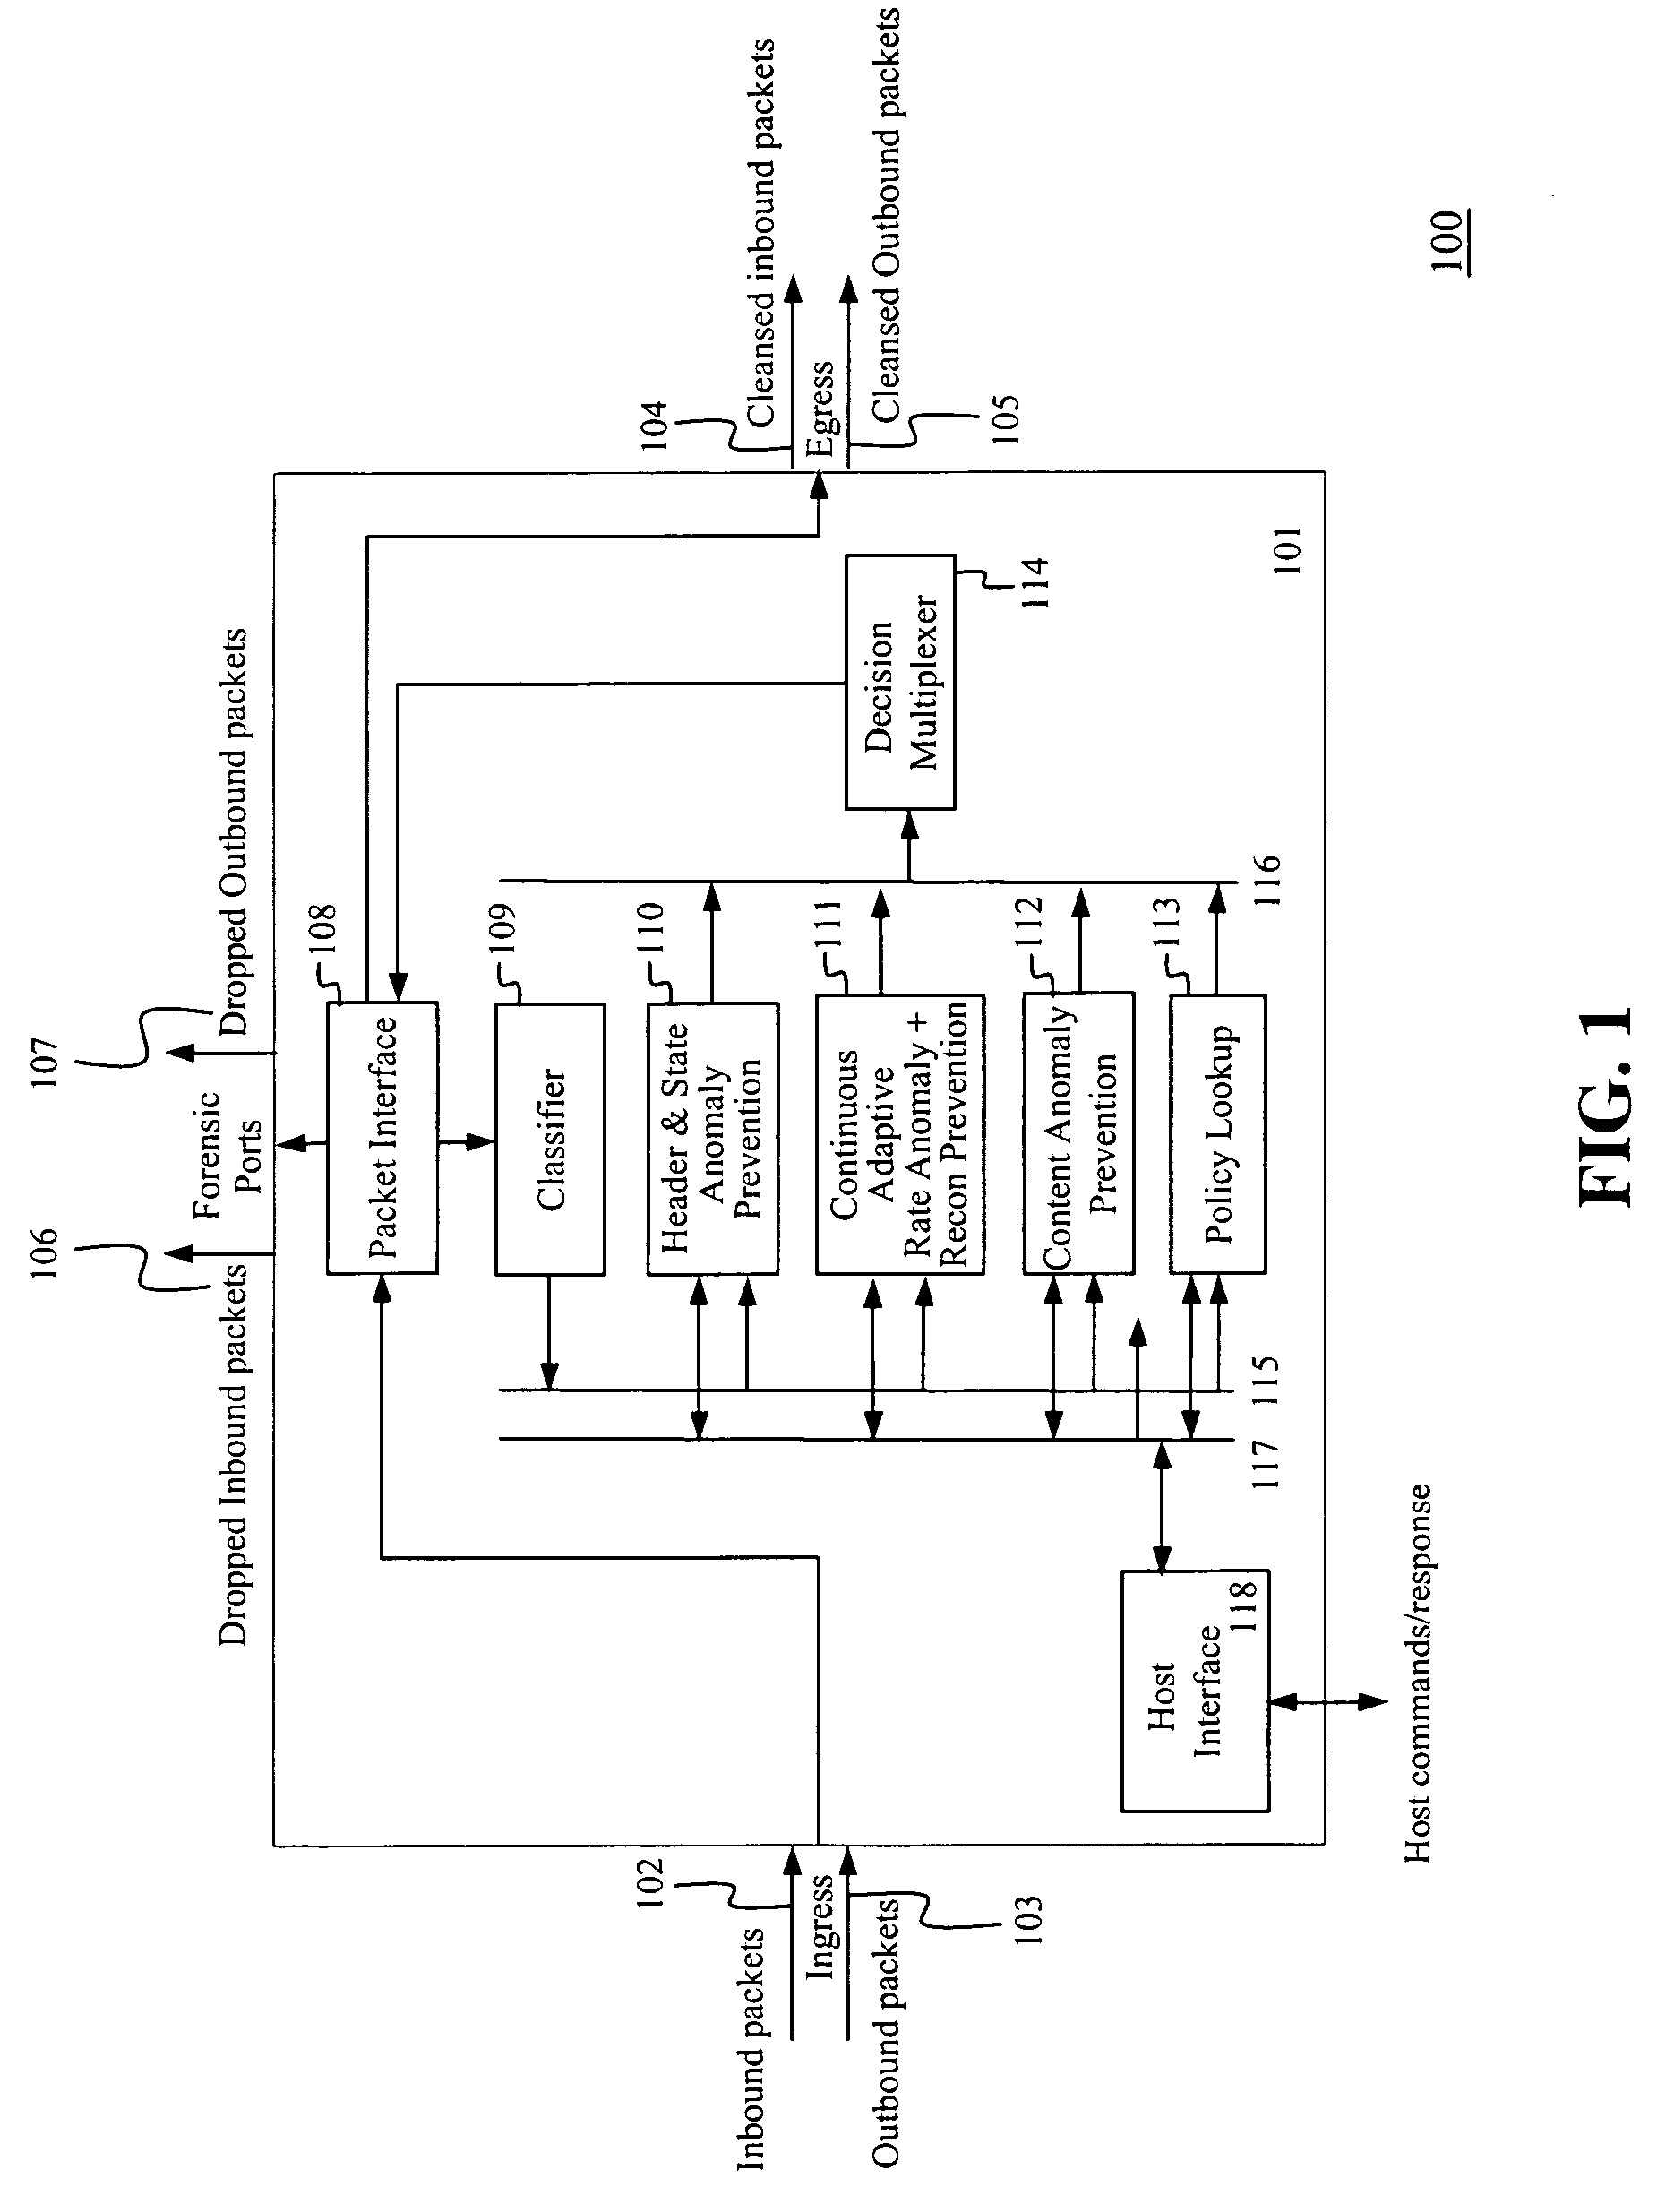 System and method for integrated header, state, rate and content anomaly prevention with policy enforcement